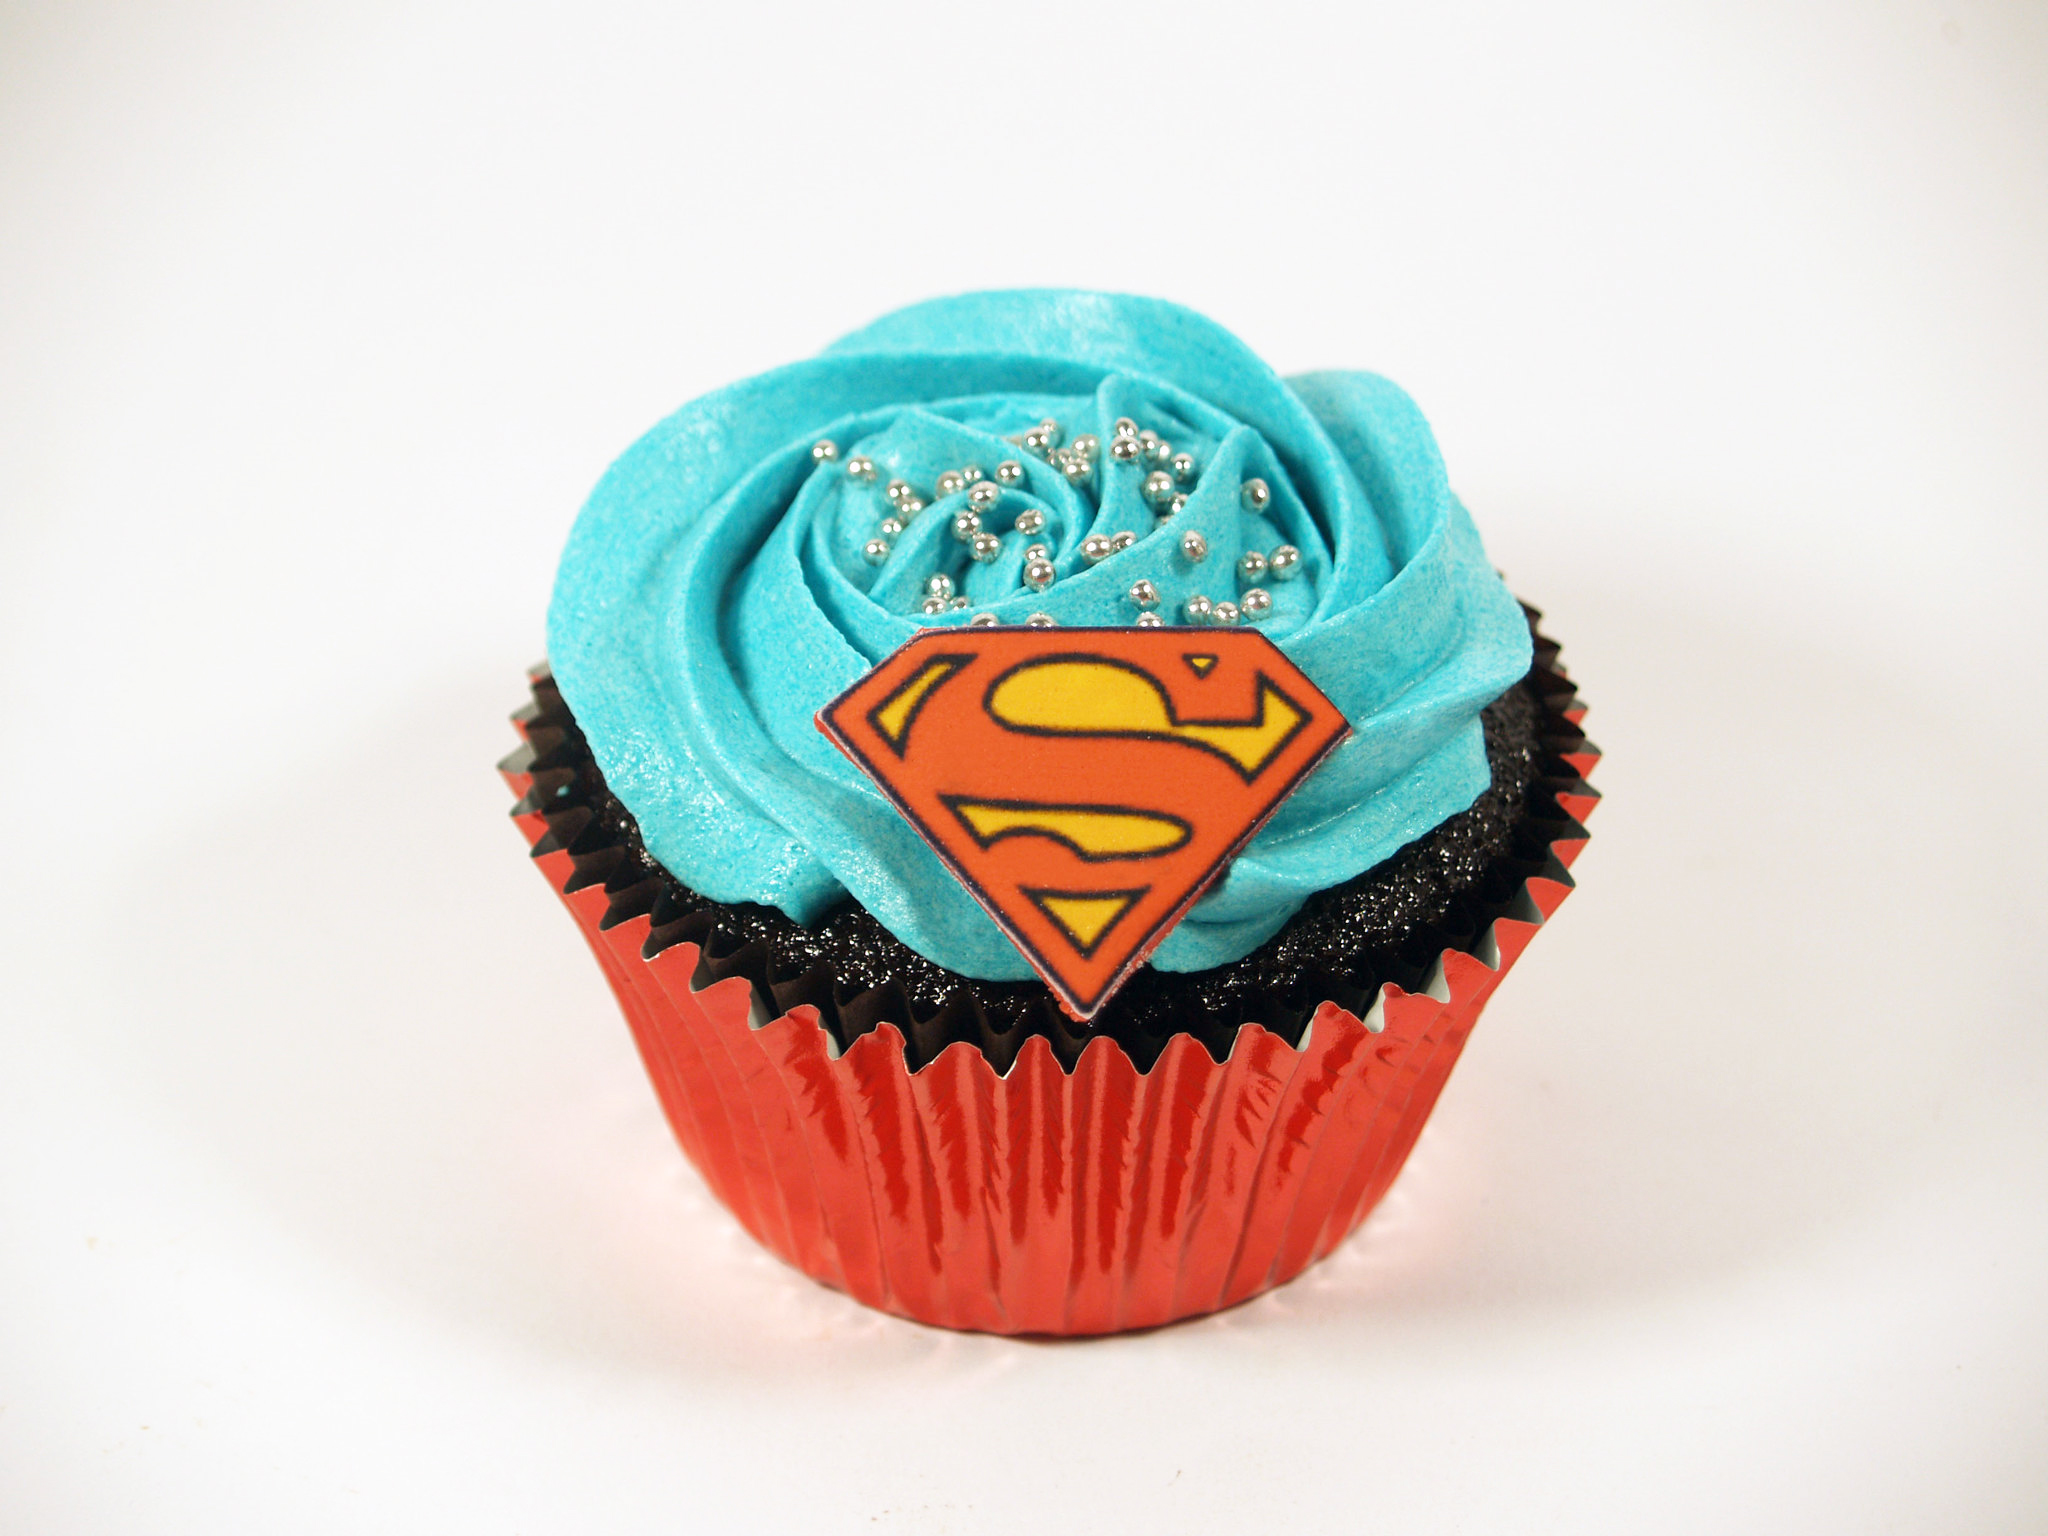 Superman Theme Cupcakes - Pack of 6